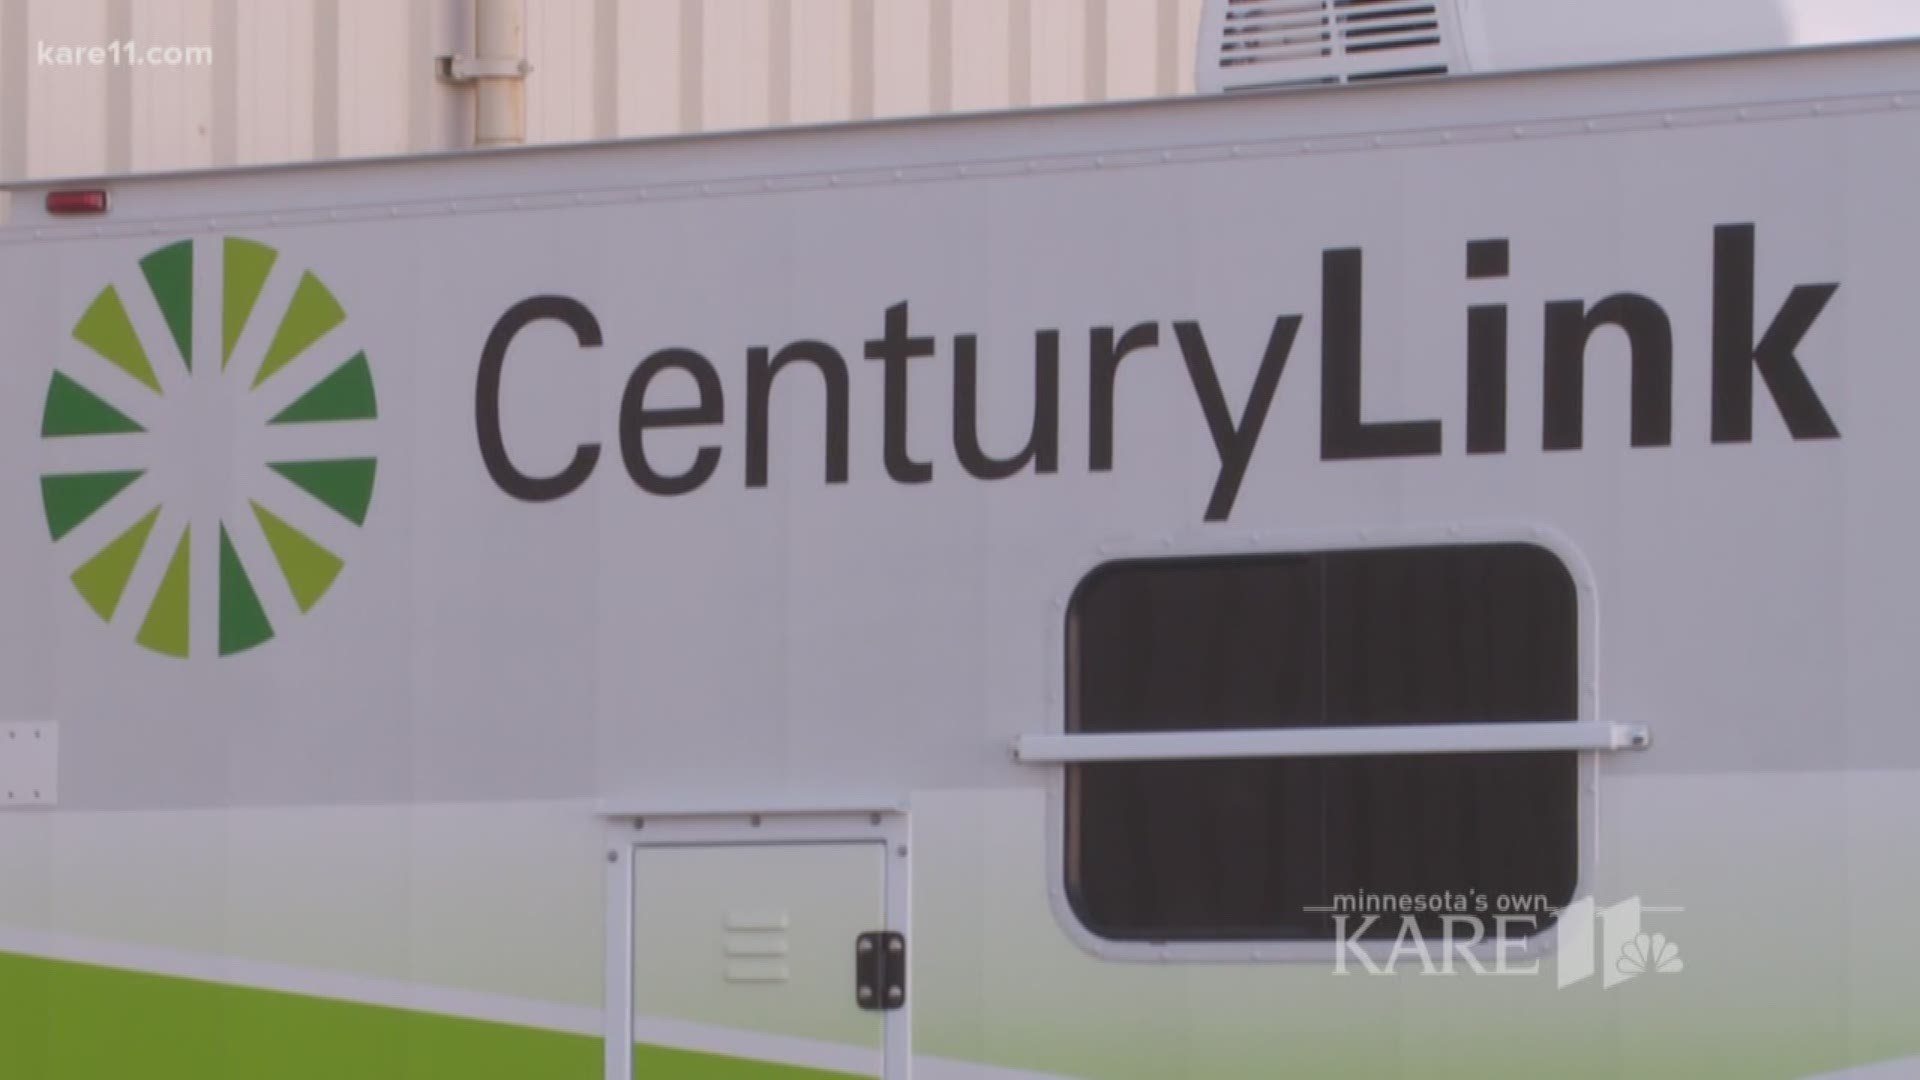 CenturyLink is offering a "price for life" internet deal. But is it too good to be true? Lou Raguse attempts to verify. http://kare11.tv/2yHYvQo